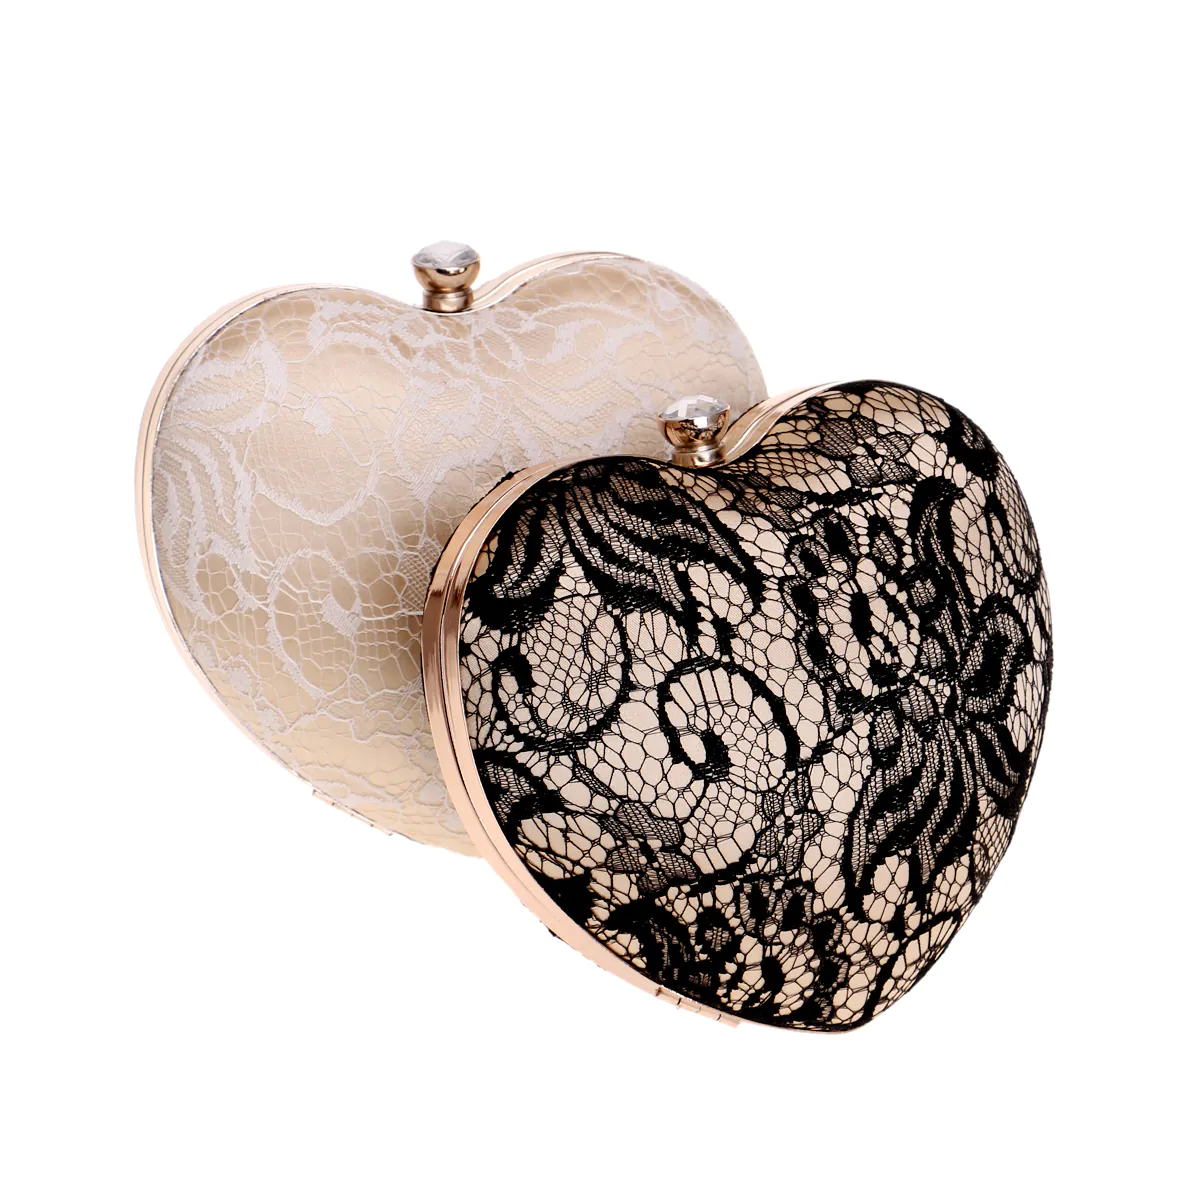 Heart Shape Lace Evening Bag Small Tote Clutch Purse for Ladies02